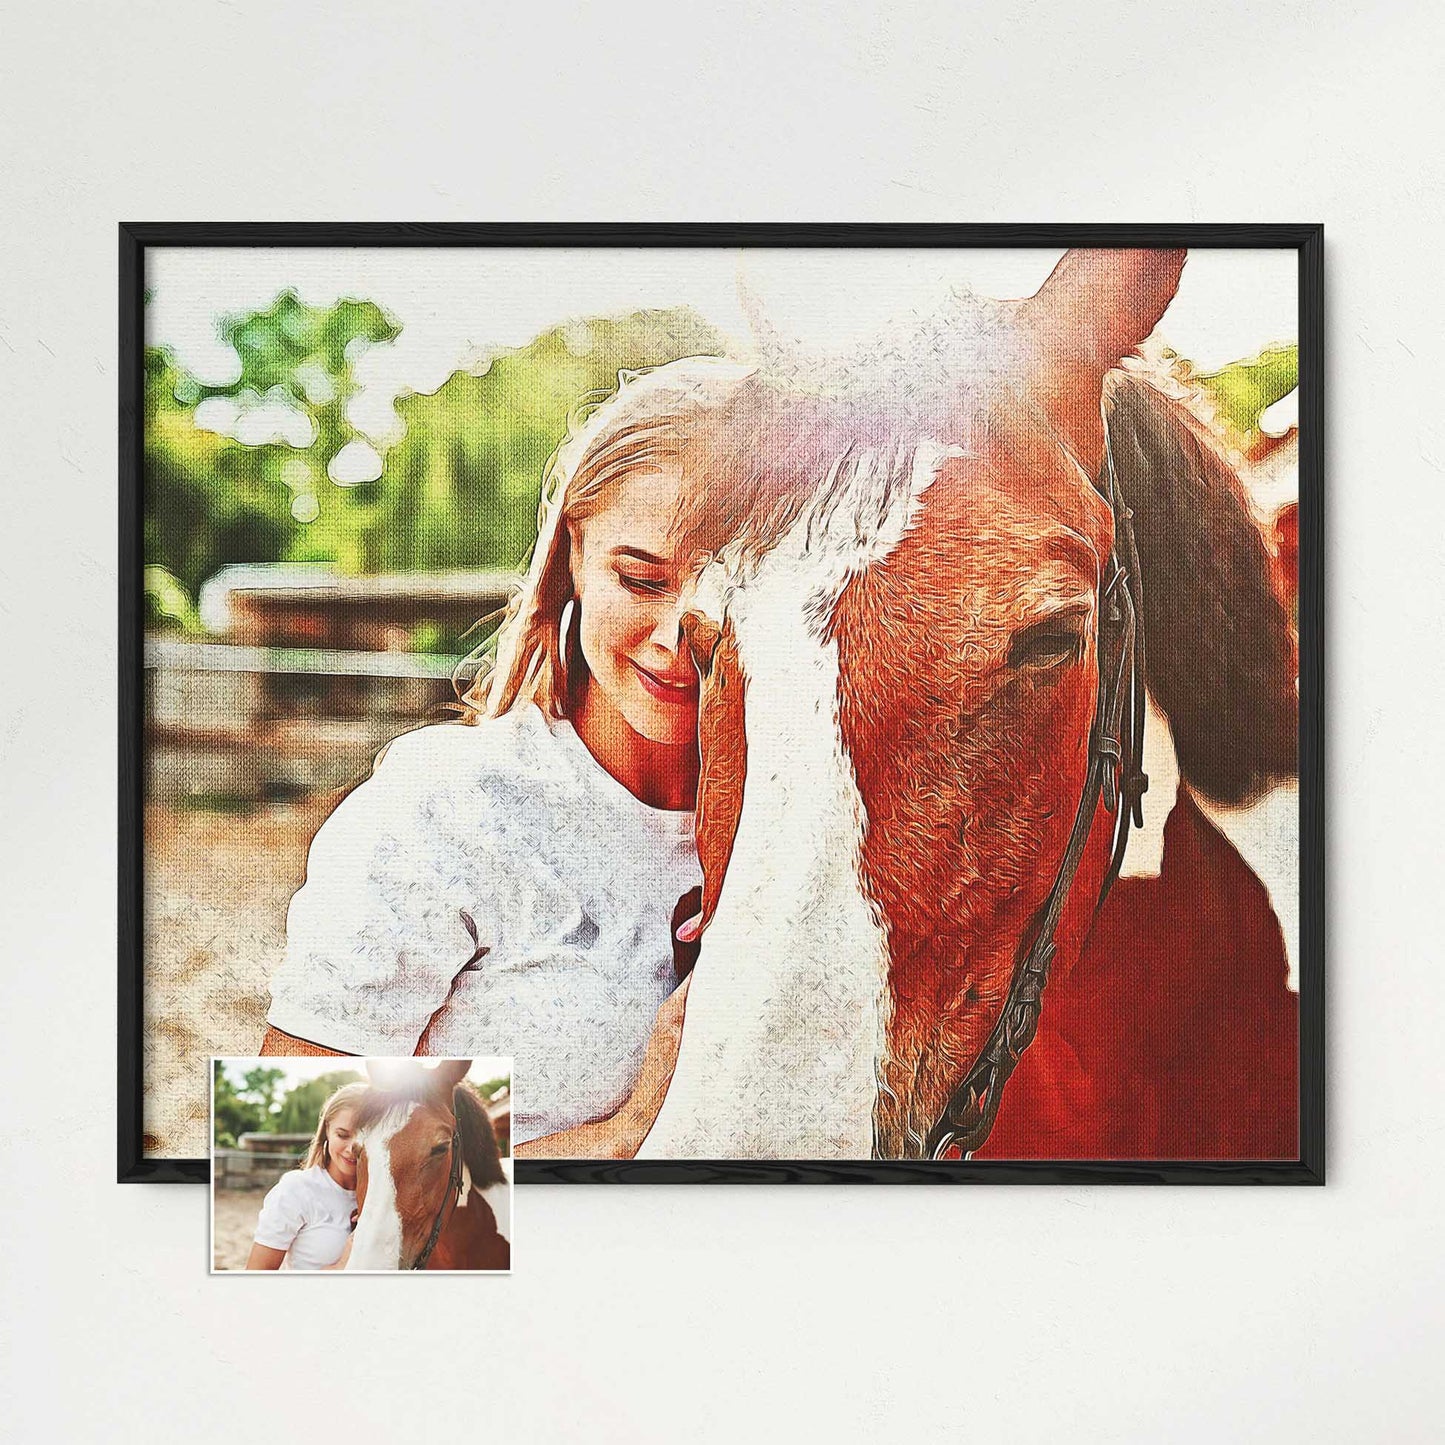 Searching for the perfect gift? Look no further than our Personalised Artistic Oil Painting Framed Print. It combines the beauty of art with the functionality of wall decor, making it a thoughtful and meaningful present for any occasion